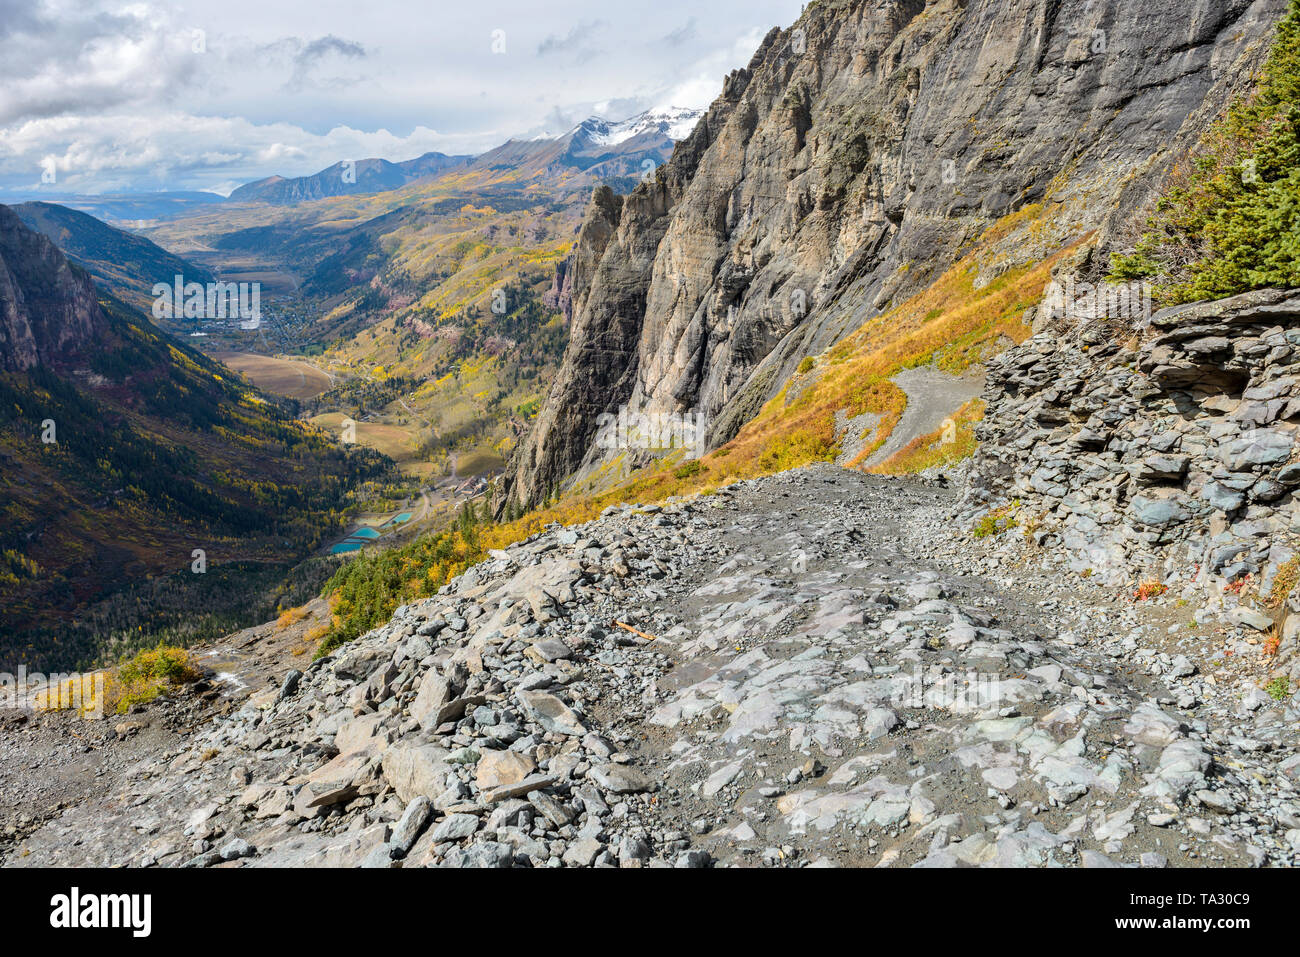 Tough High Mountain Road - An autumn day on a dangerous section of Black Bear Pass Trail, above the town of Telluride, Colorado, USA. Stock Photo